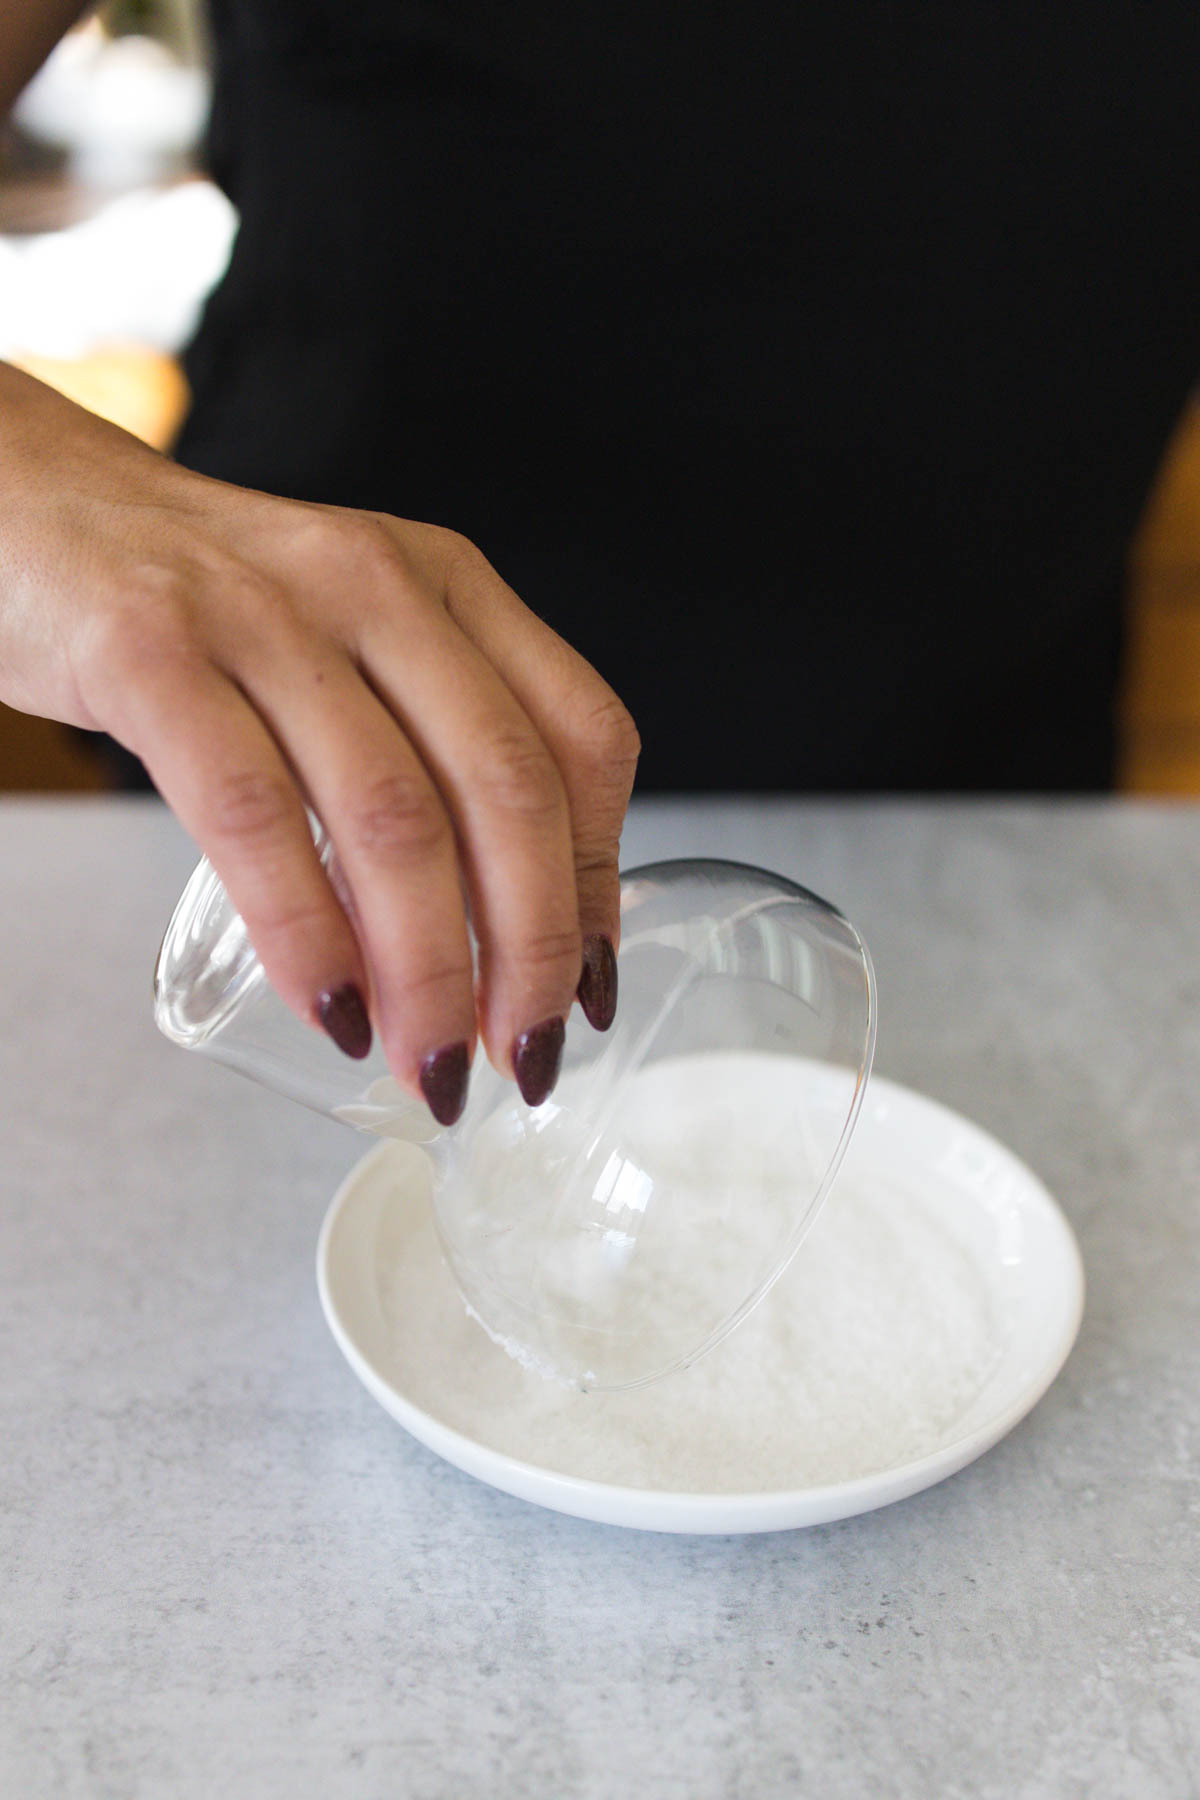 A woman dipping portion of a margarita glass in a small plate with salt.